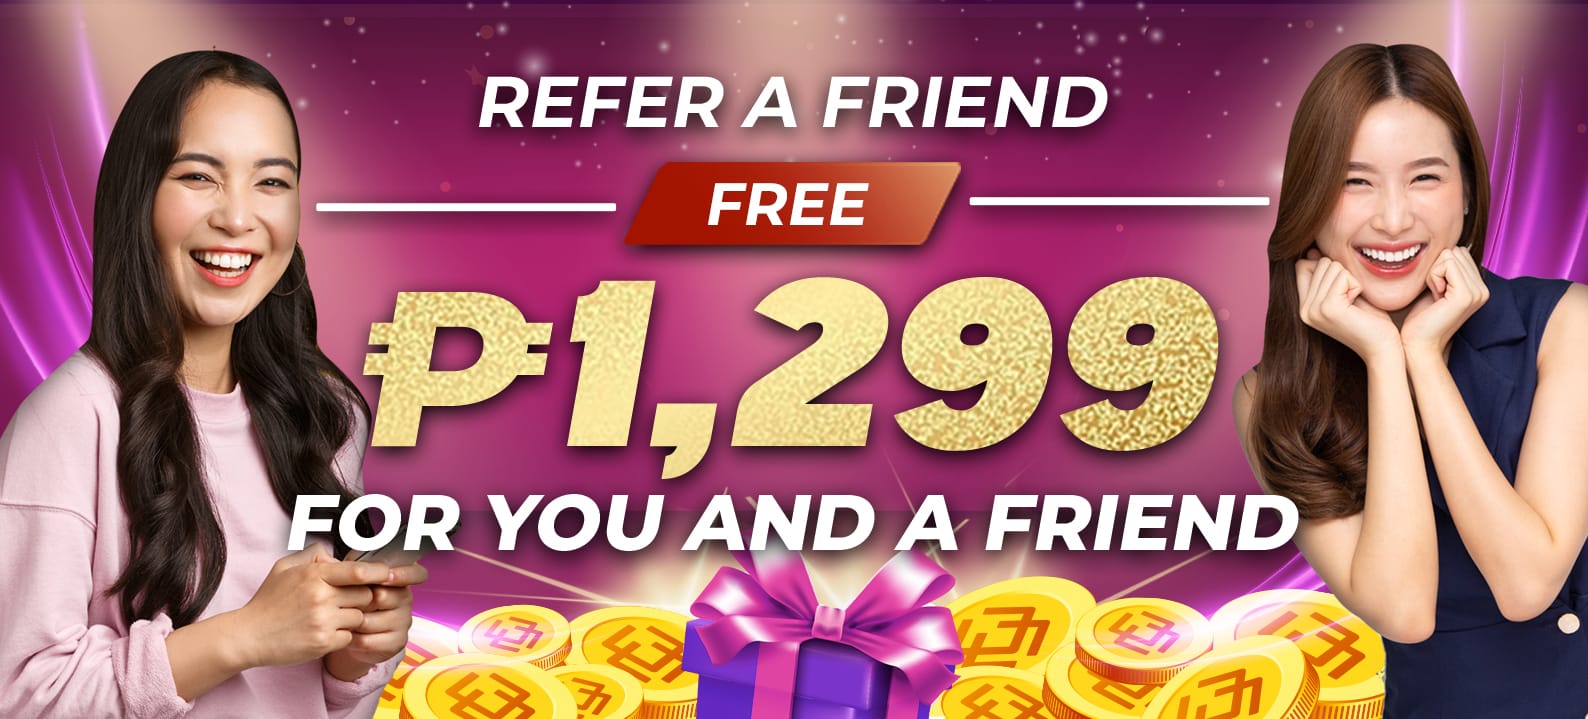 Refer A friend and get Free 1,299 PHP for you and A friend